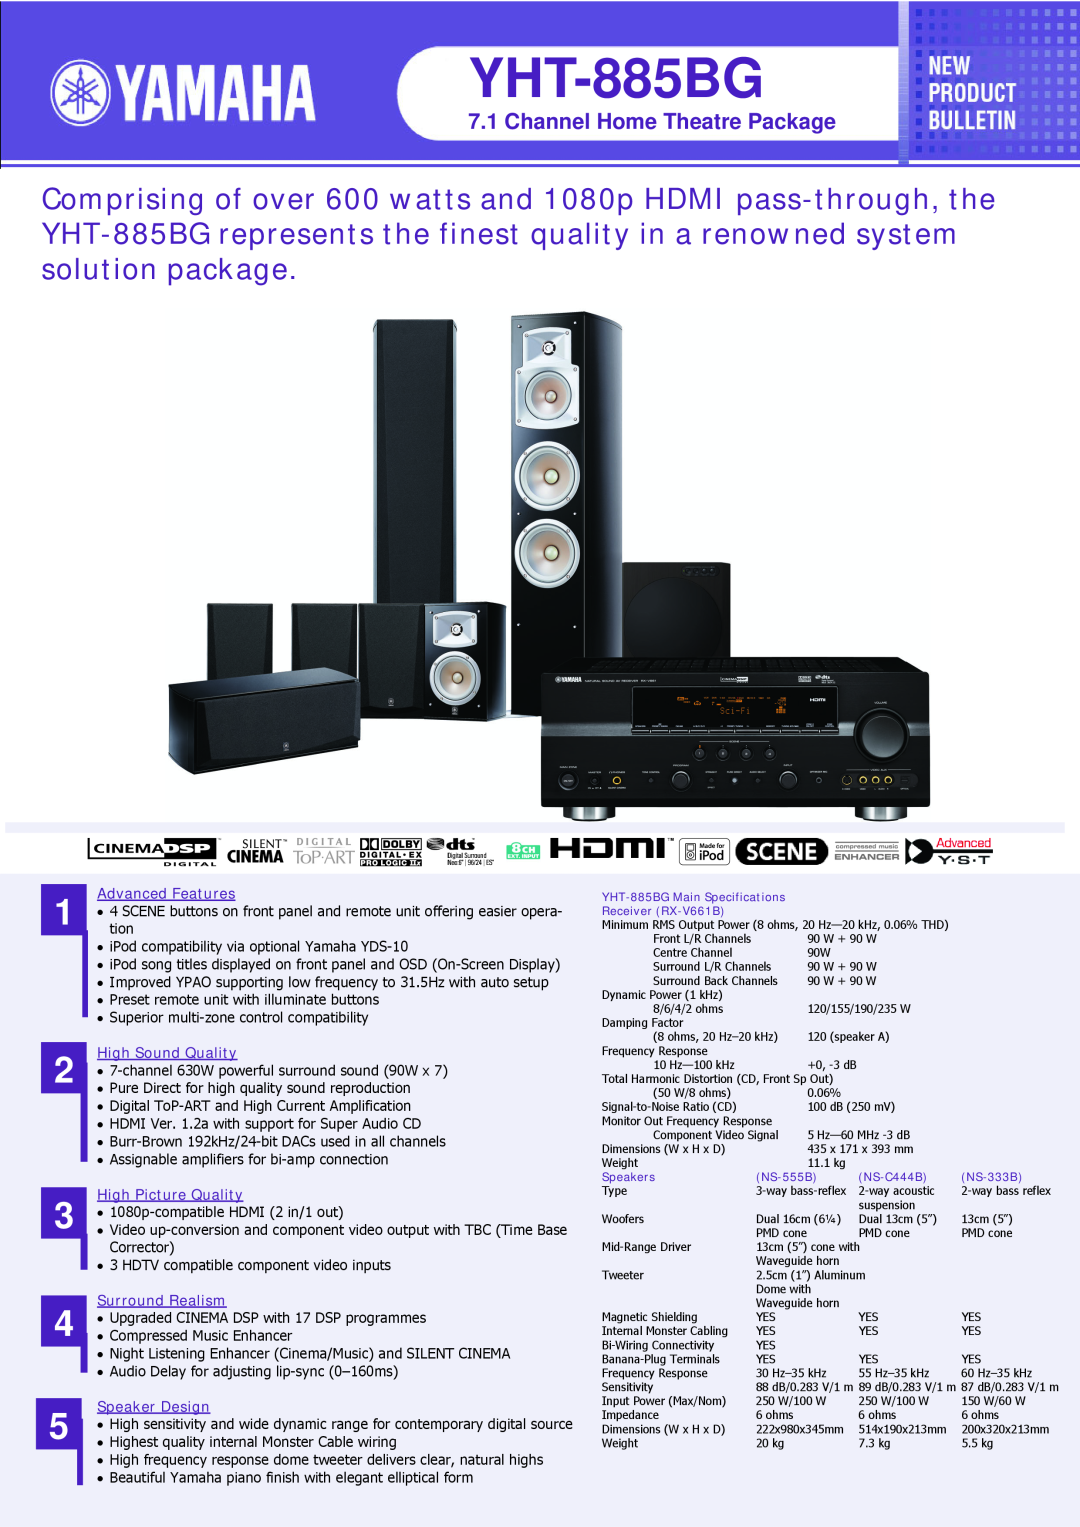 Yamaha YHT-885BG specifications Channel Home Theatre Package, Advanced Features, High Sound Quality, High Picture Quality 